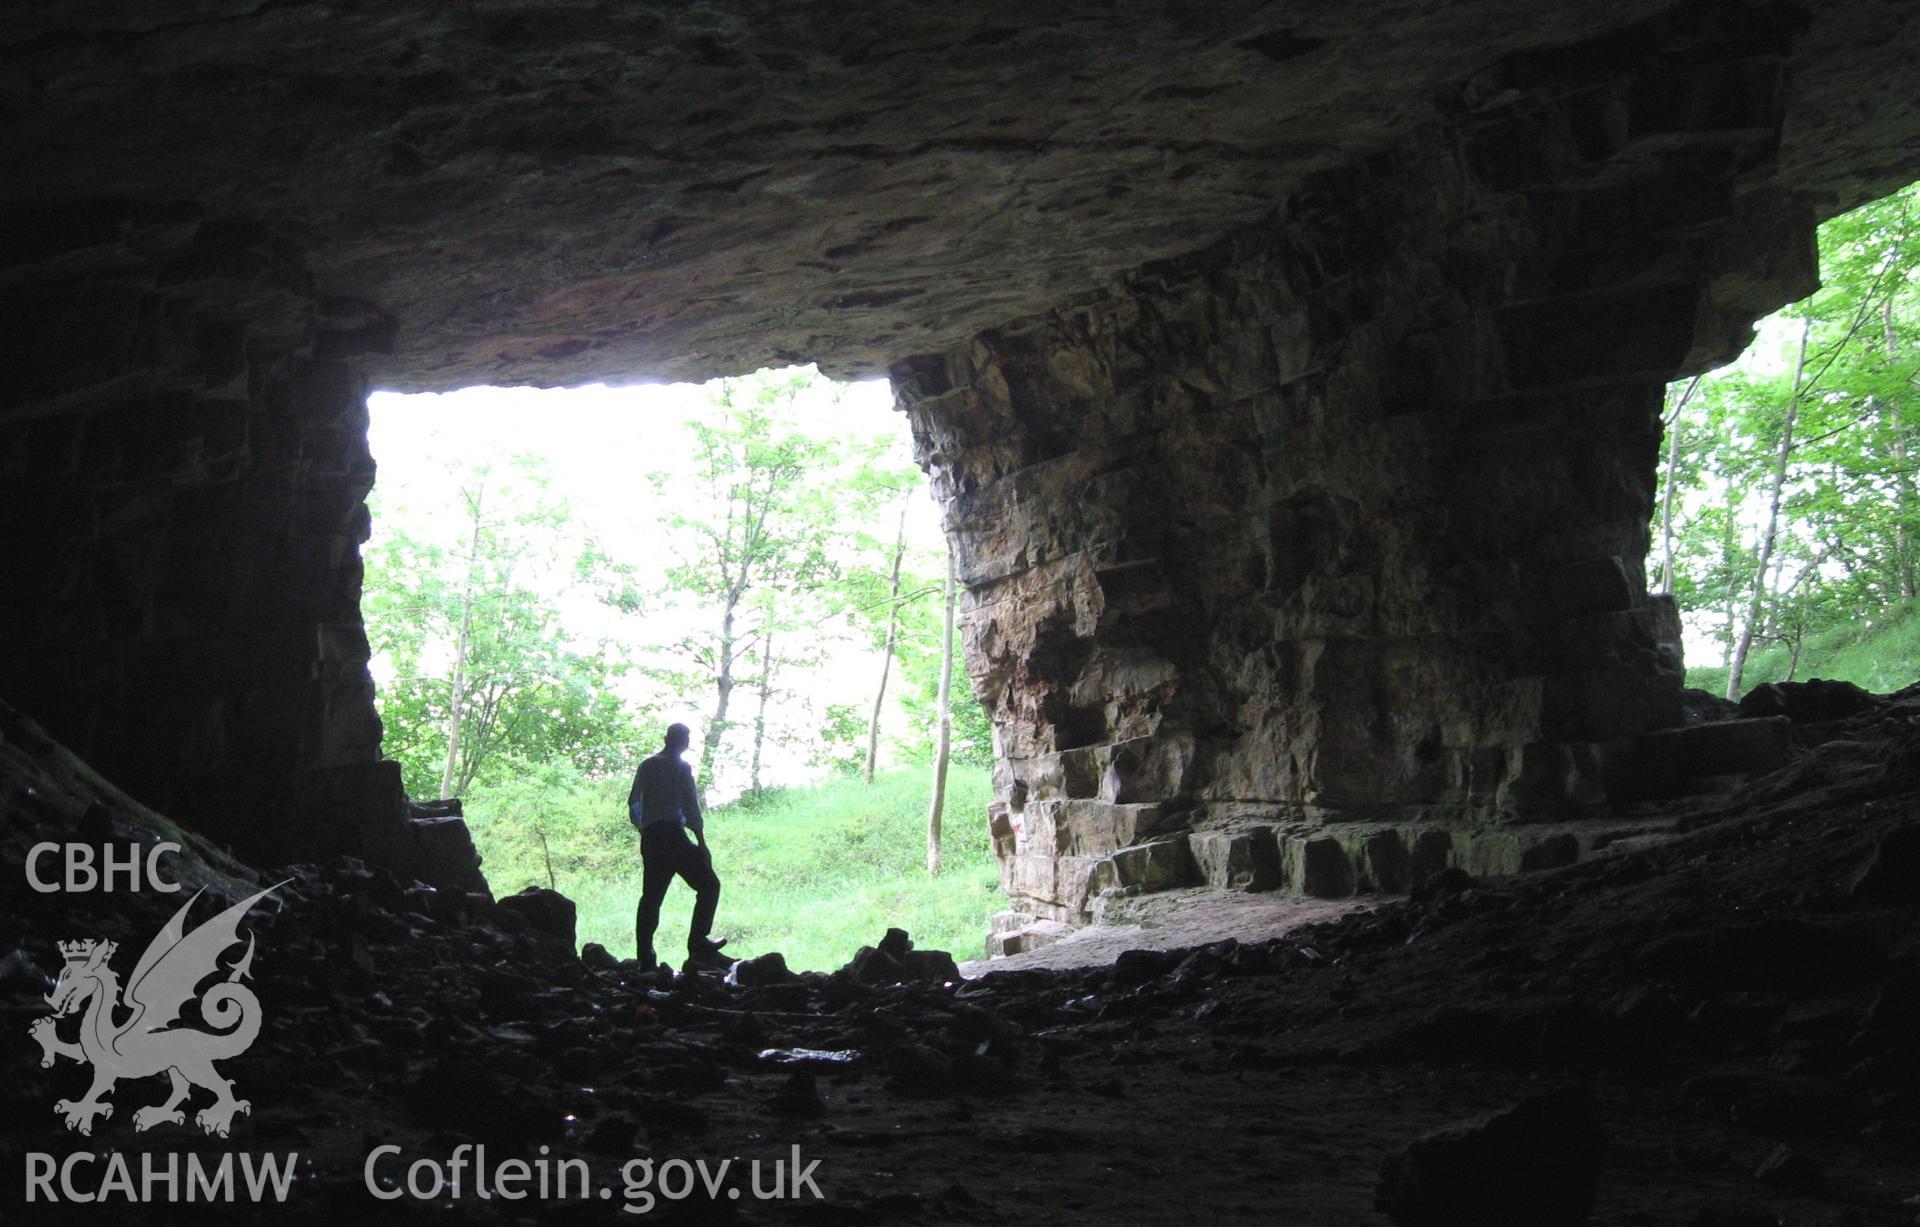 Colour photo showing Quarry Caves, Great Orme, taken by Paul R. Davis and dated 12th February 2010.